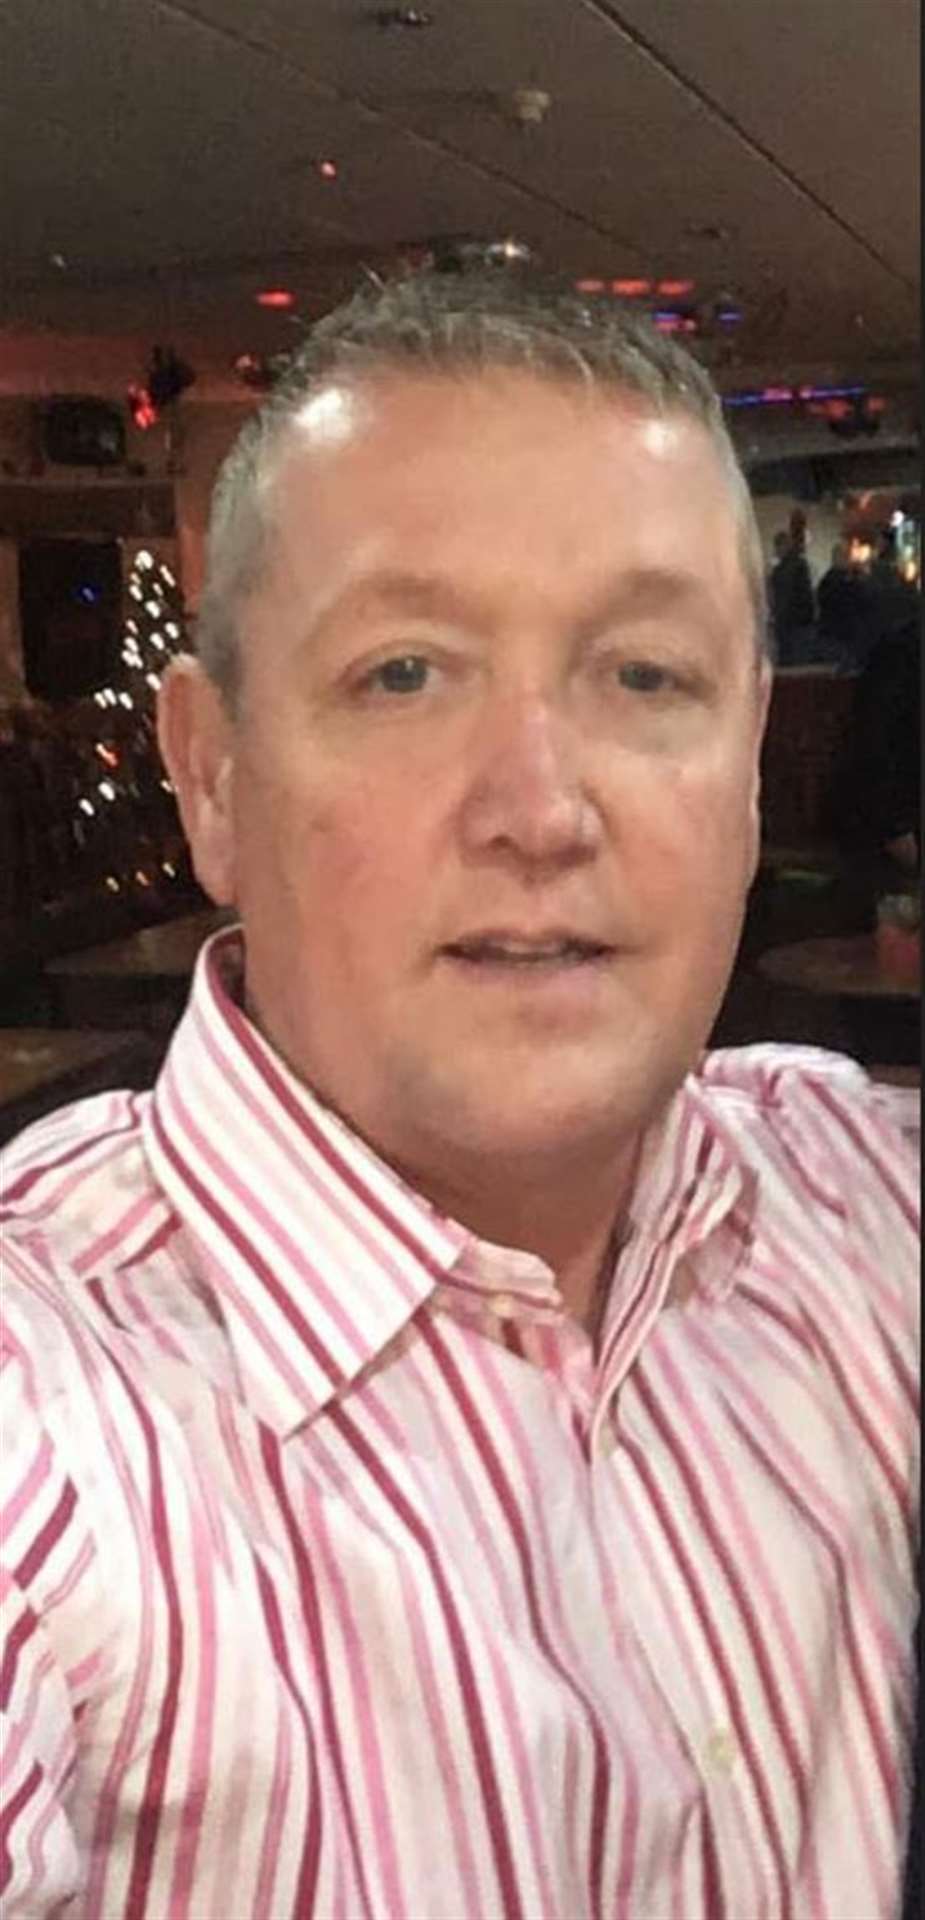 Sheldon Flanighan was fatally injured after he was struck by a van in Cramlington, Northumberland (Northumbria Police/PA)